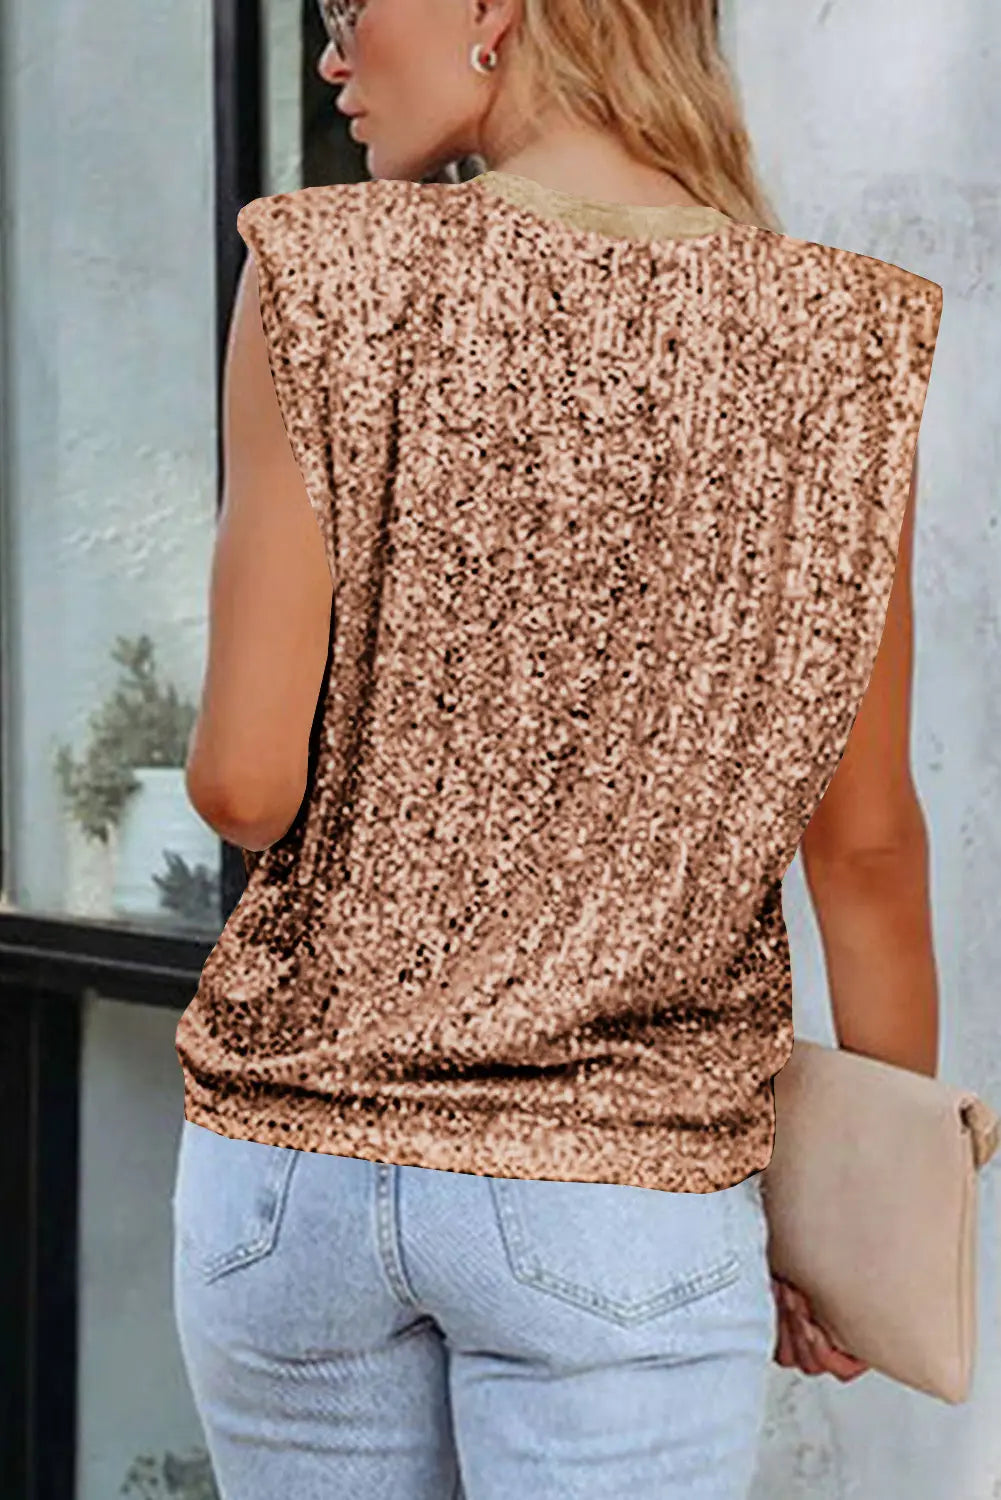 Black apricot sequin round neck tank top - tops